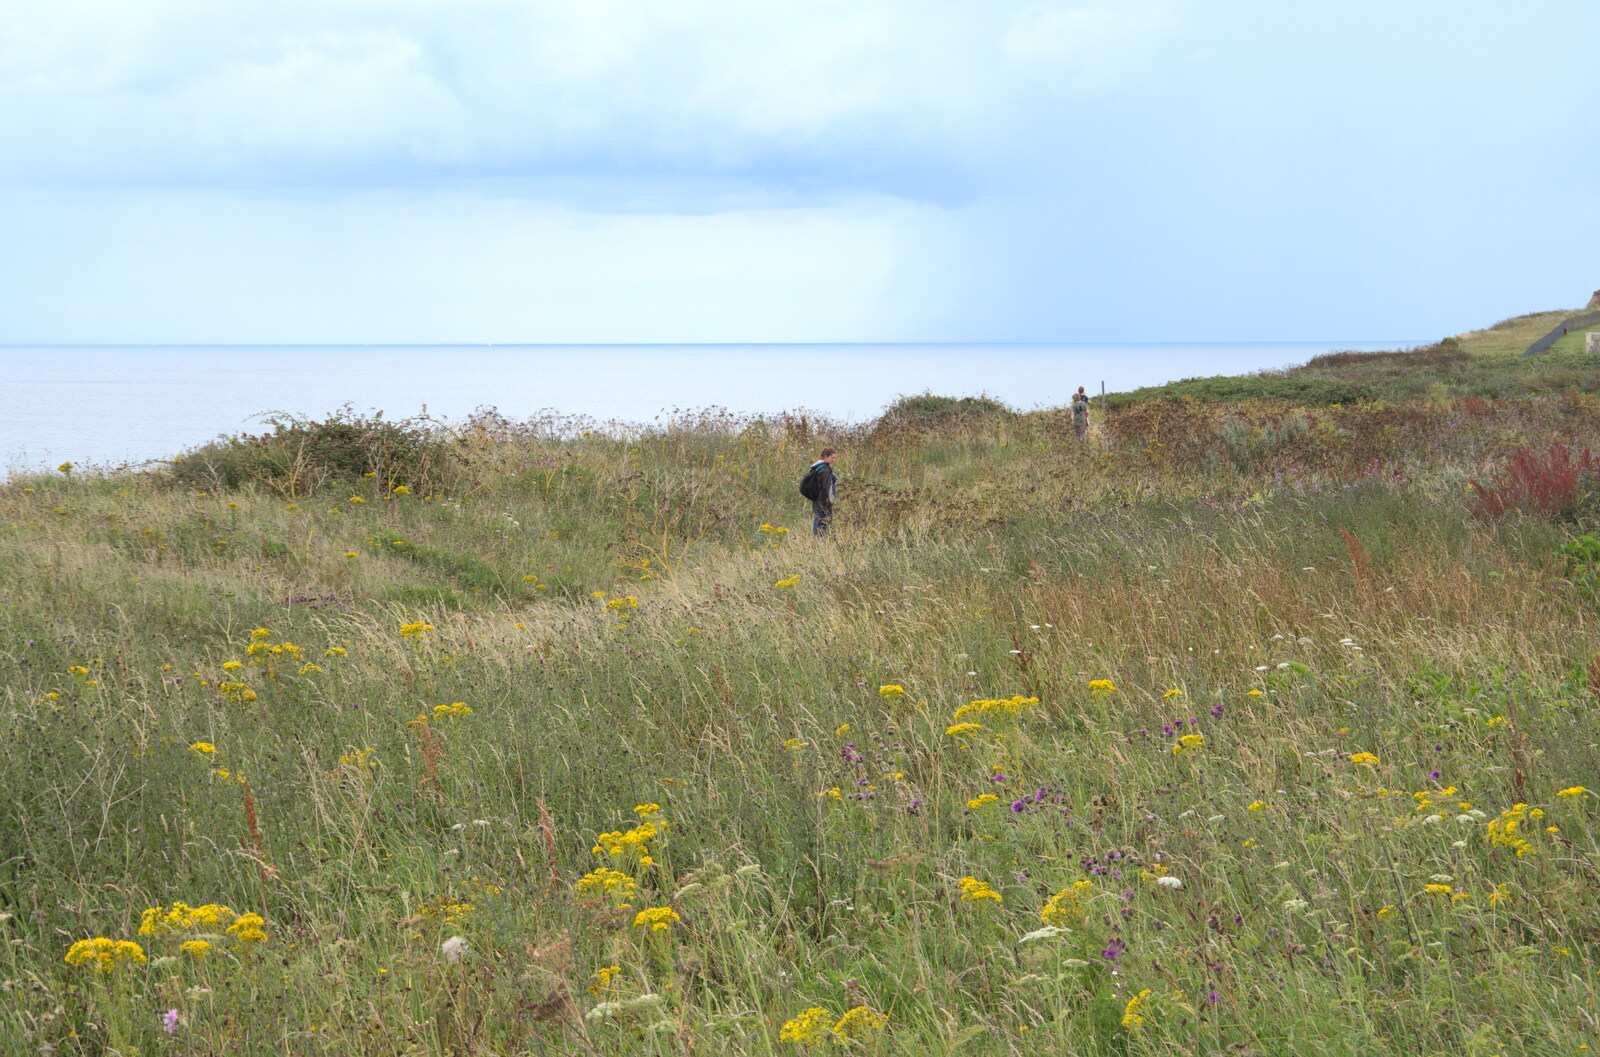 Flowers on the cliff top from Camping on the Coast, East Runton, North Norfolk - 25th July 2020